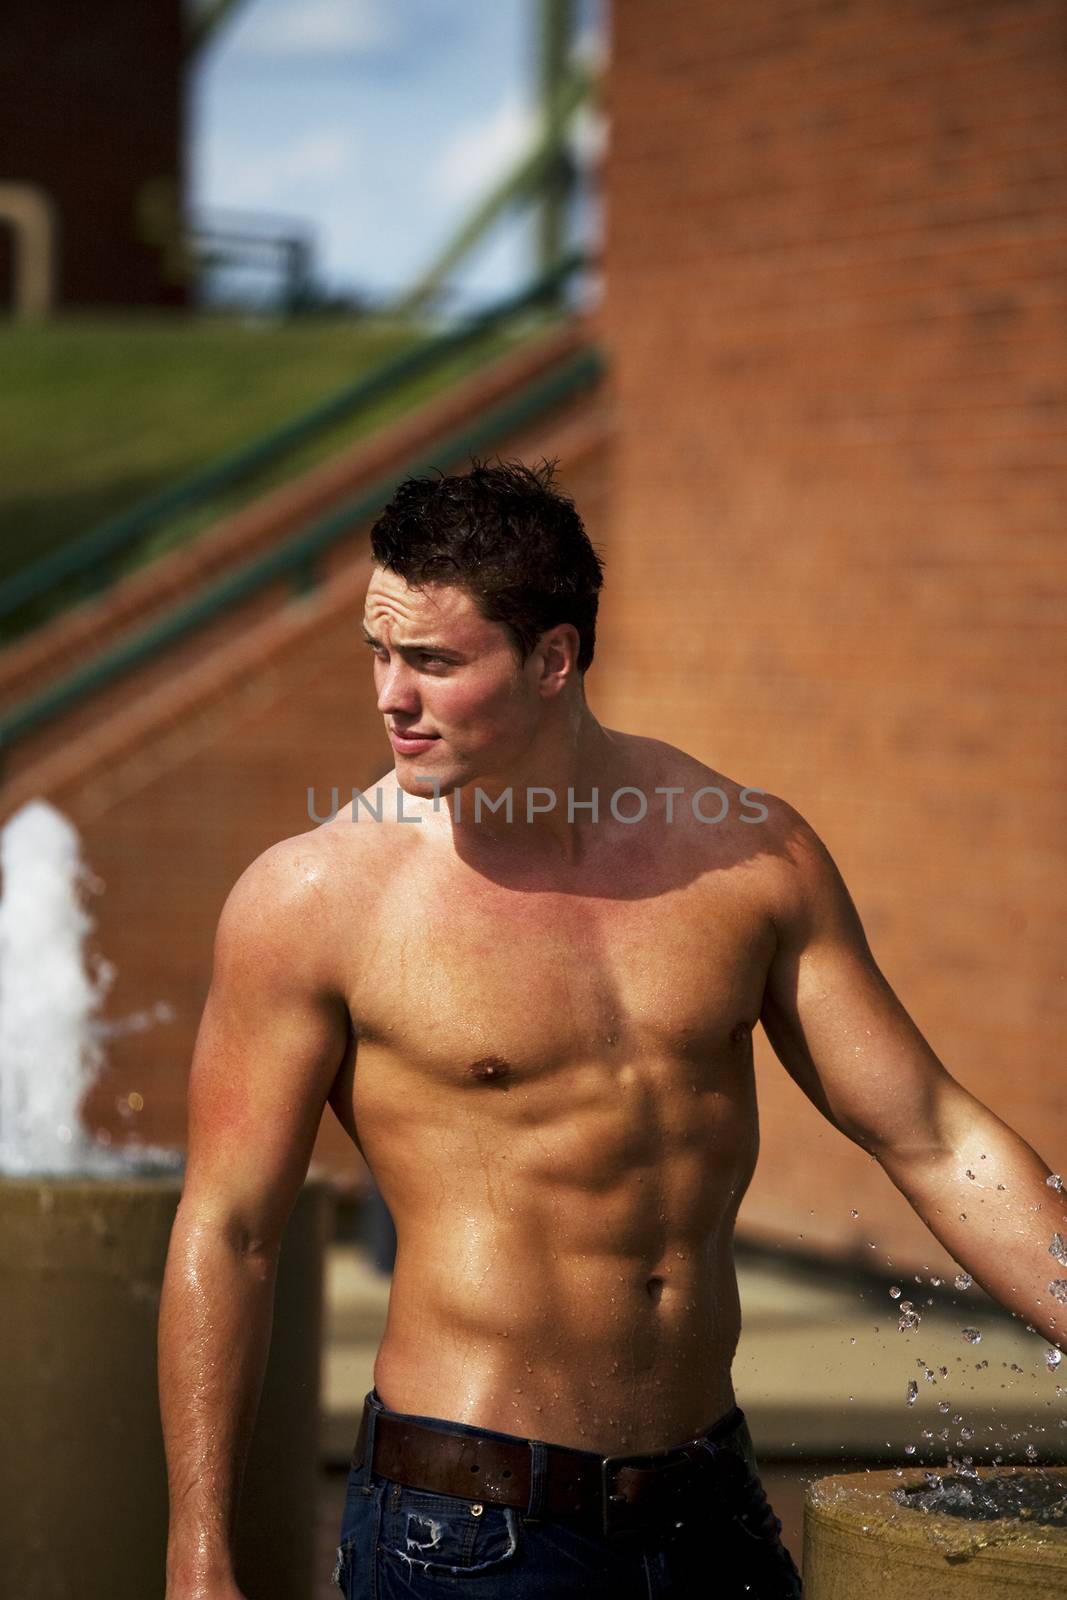 A young bodybuilder cooling off in a fountain on a hot summer day.